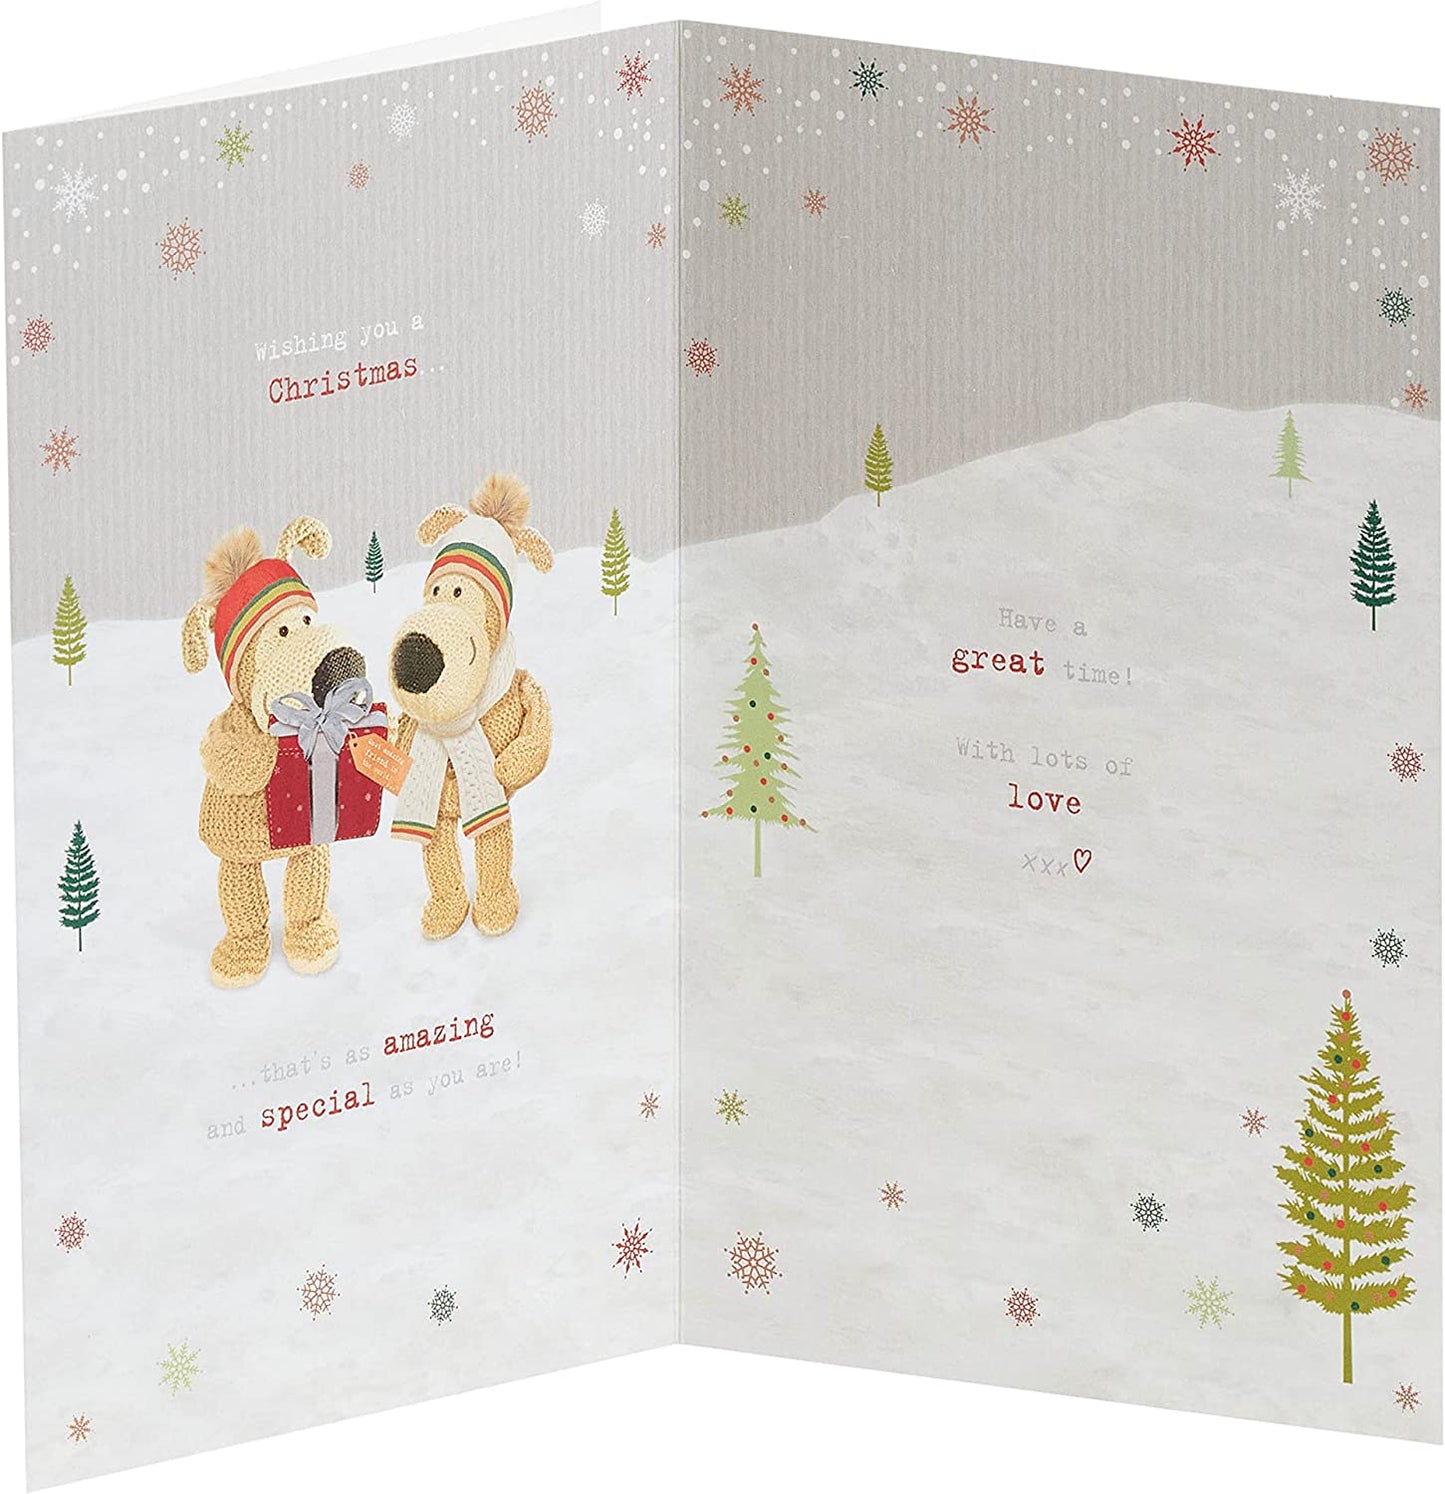 To Friend Boofle Holding a Huge Present Design Christmas Card